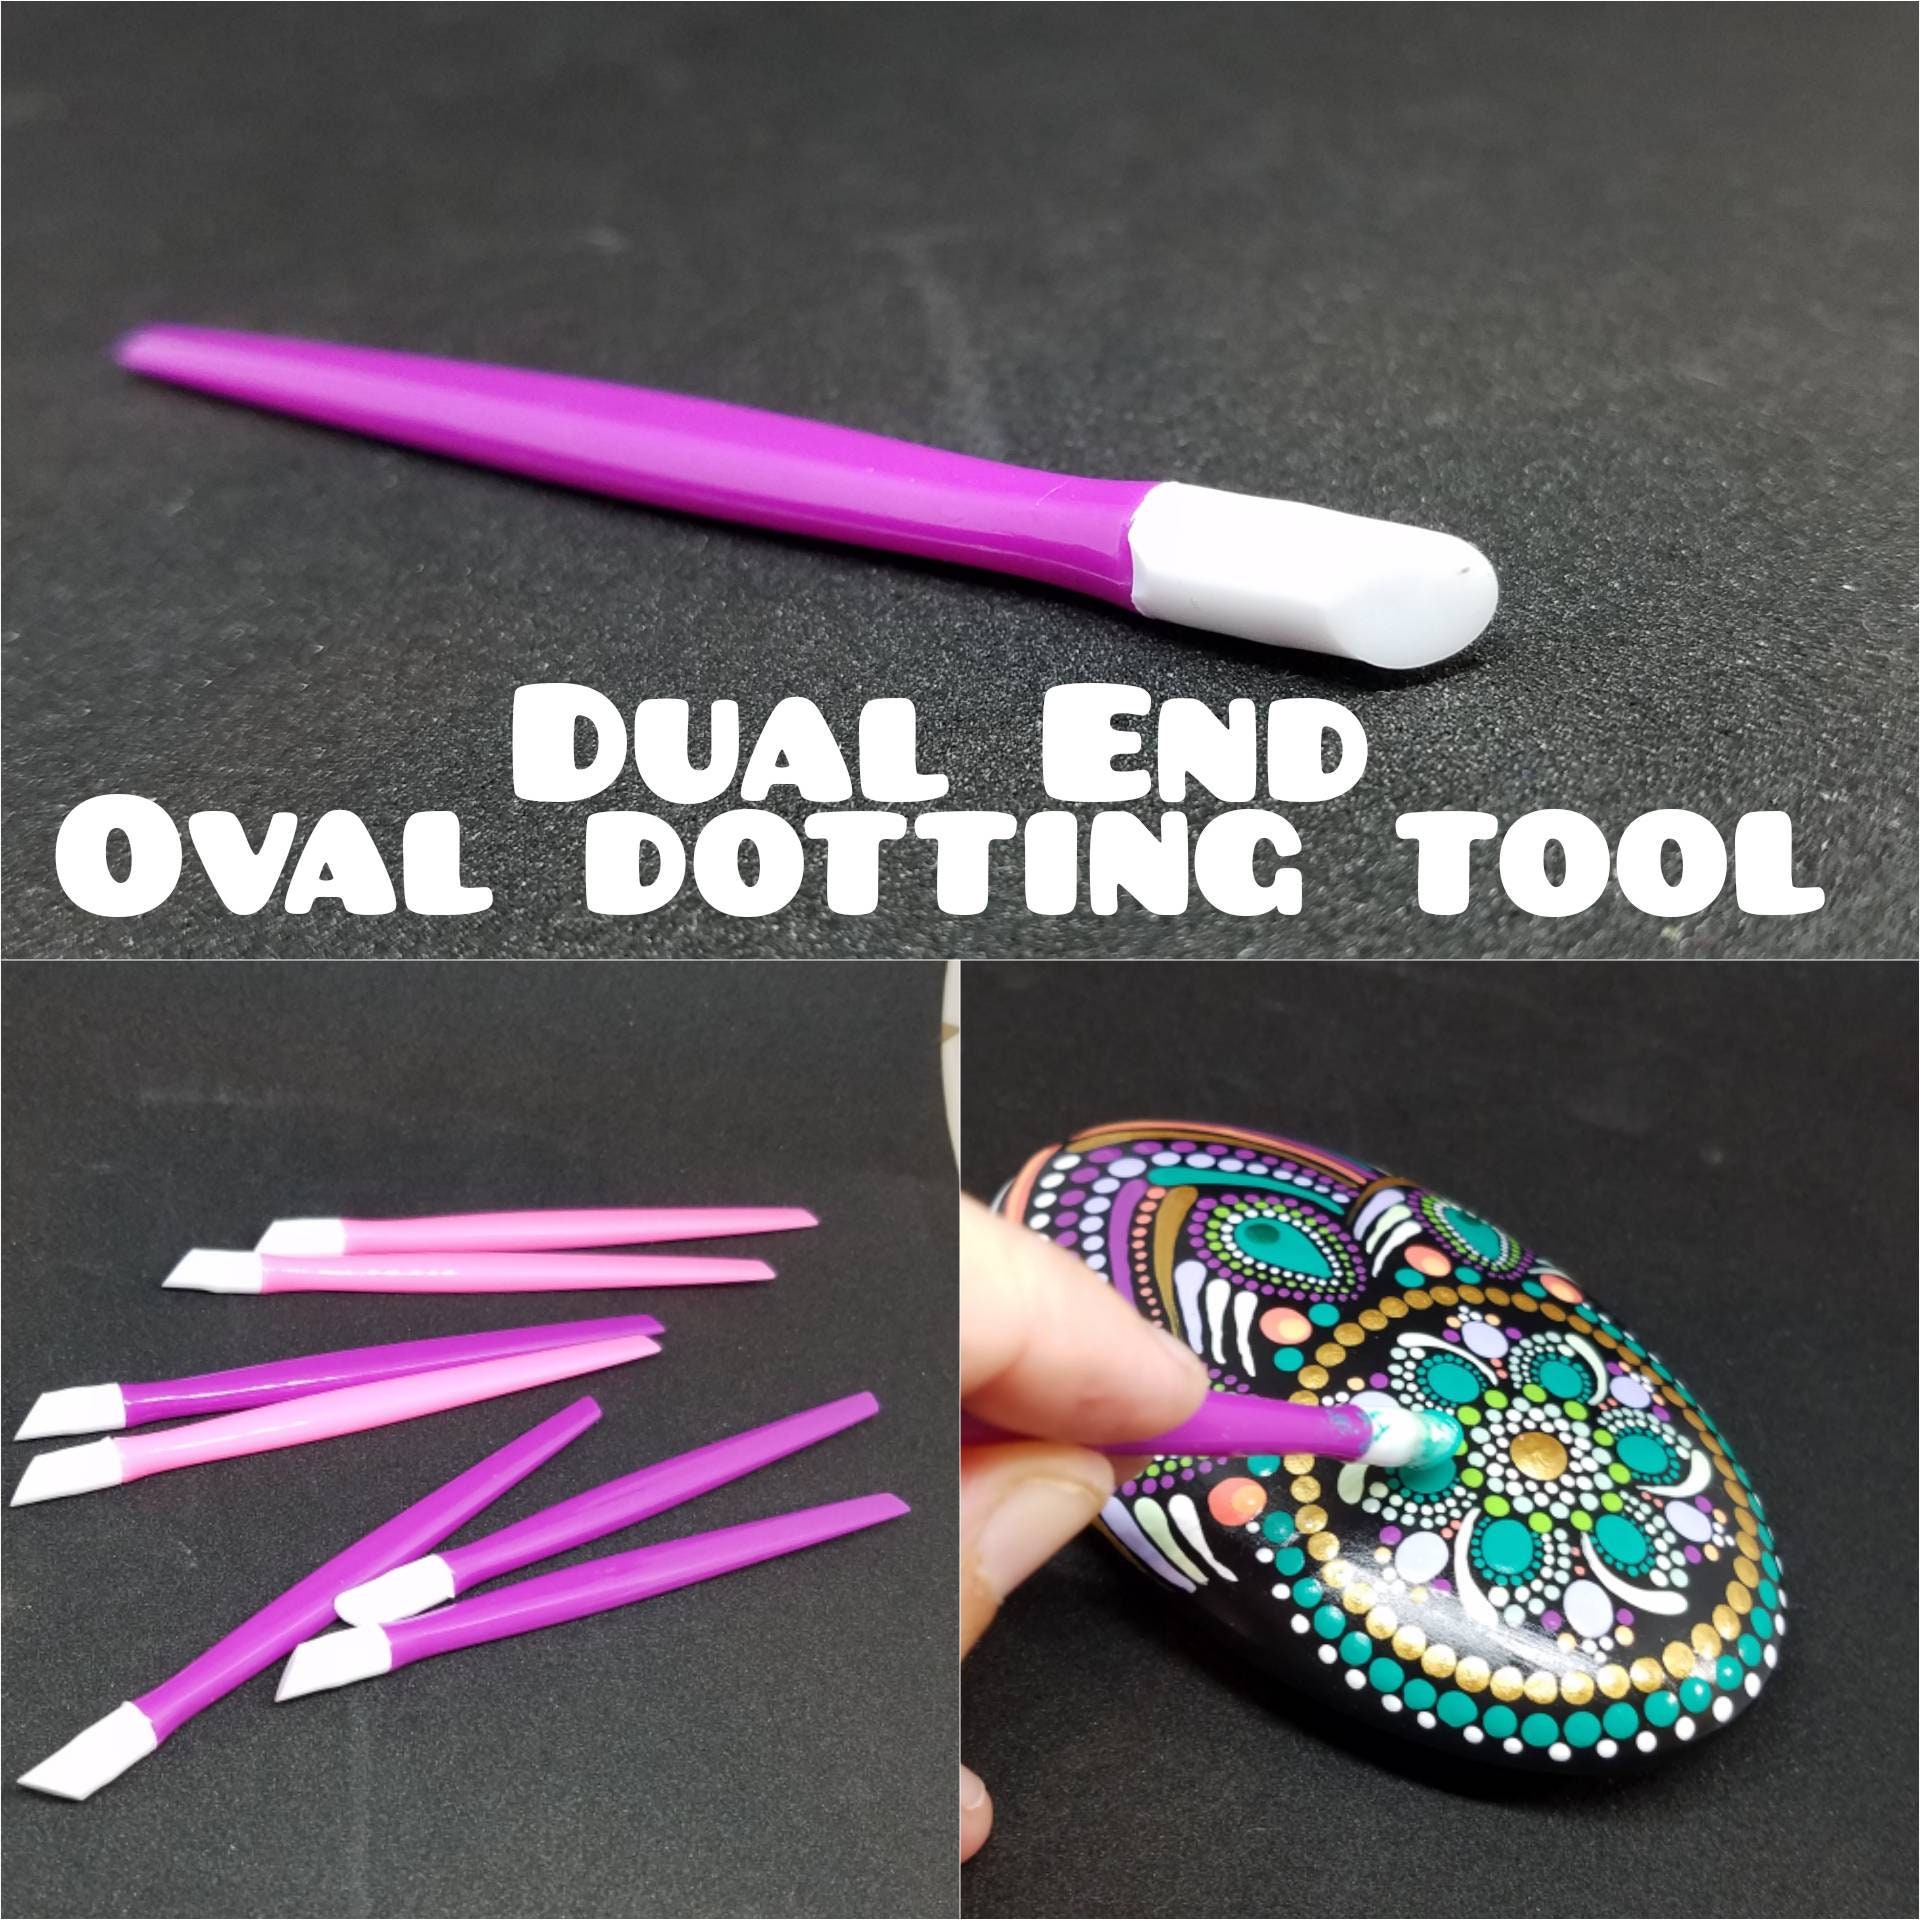 DIY Kit Set of 8 X Dotting Tool for Dot Painting, Mandala Stone Painting,  Dot Art Projects and Rock Painting 